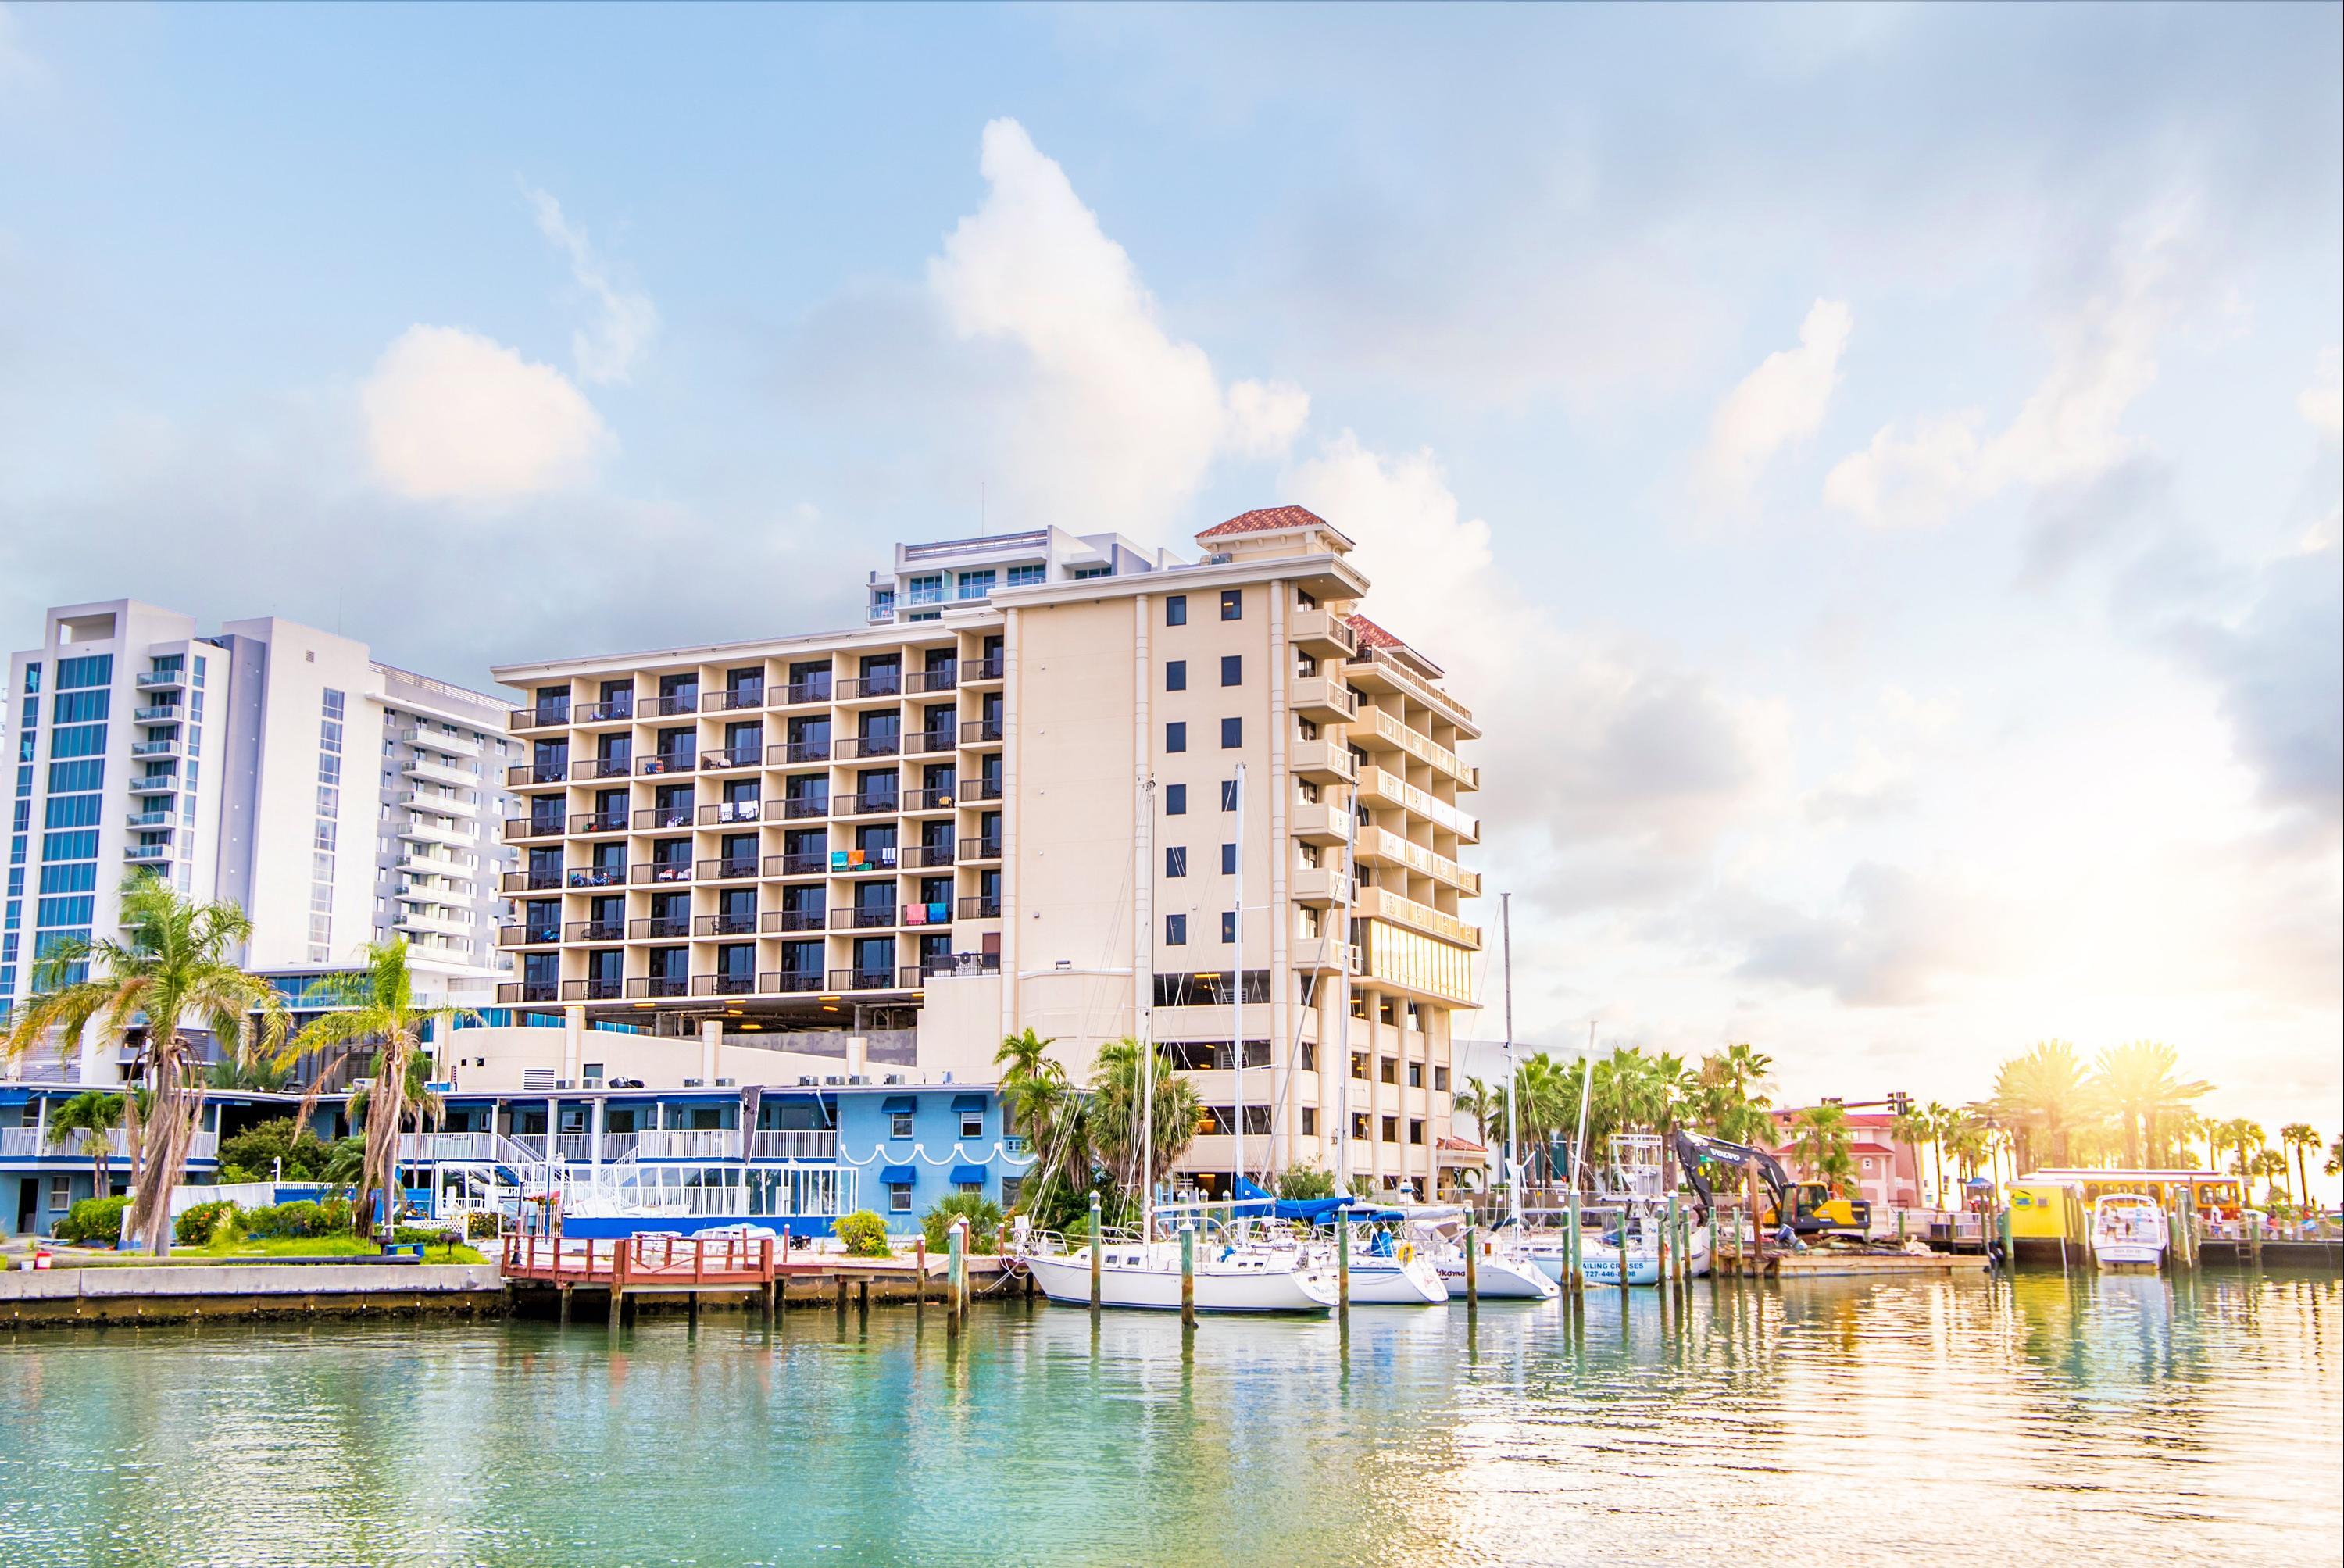 12 Best Hotels in Clearwater Beach. Hotels from $179/night - KAYAK